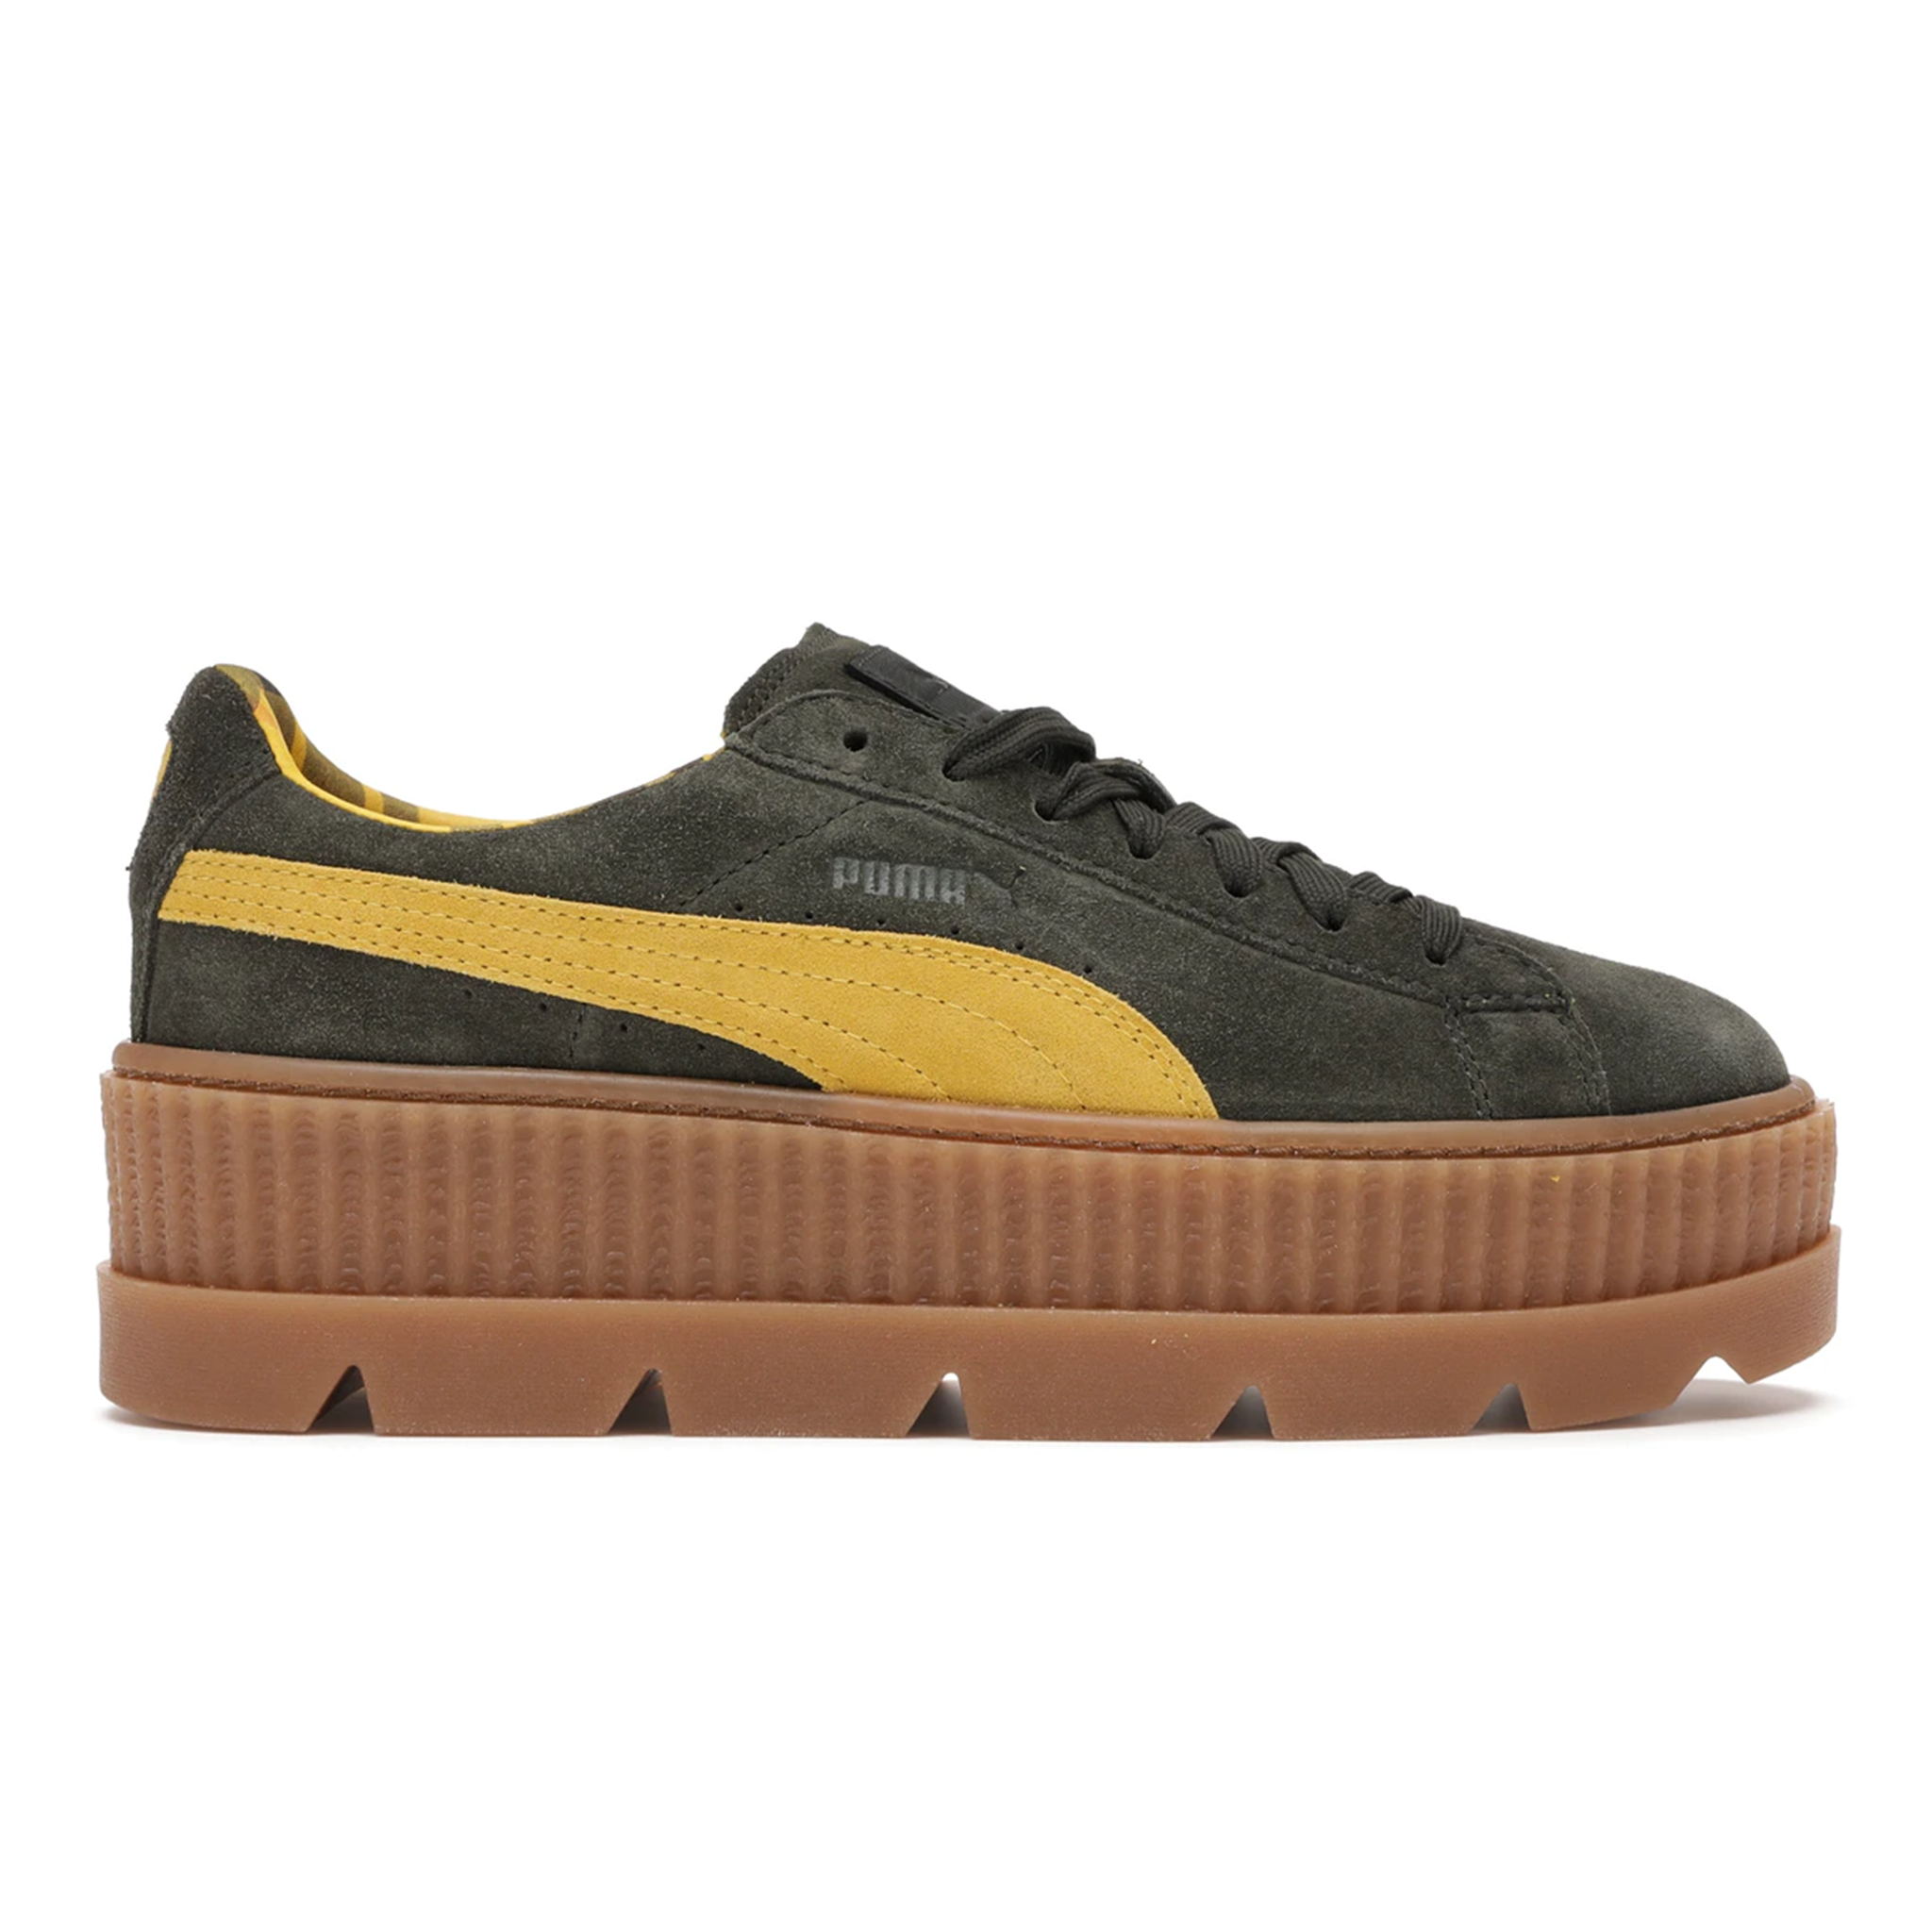 Bediening mogelijk mixer optellen Puma Fenty By Rihanna Cleated Creeper Lace Up Suede Women Trainers 366268 01